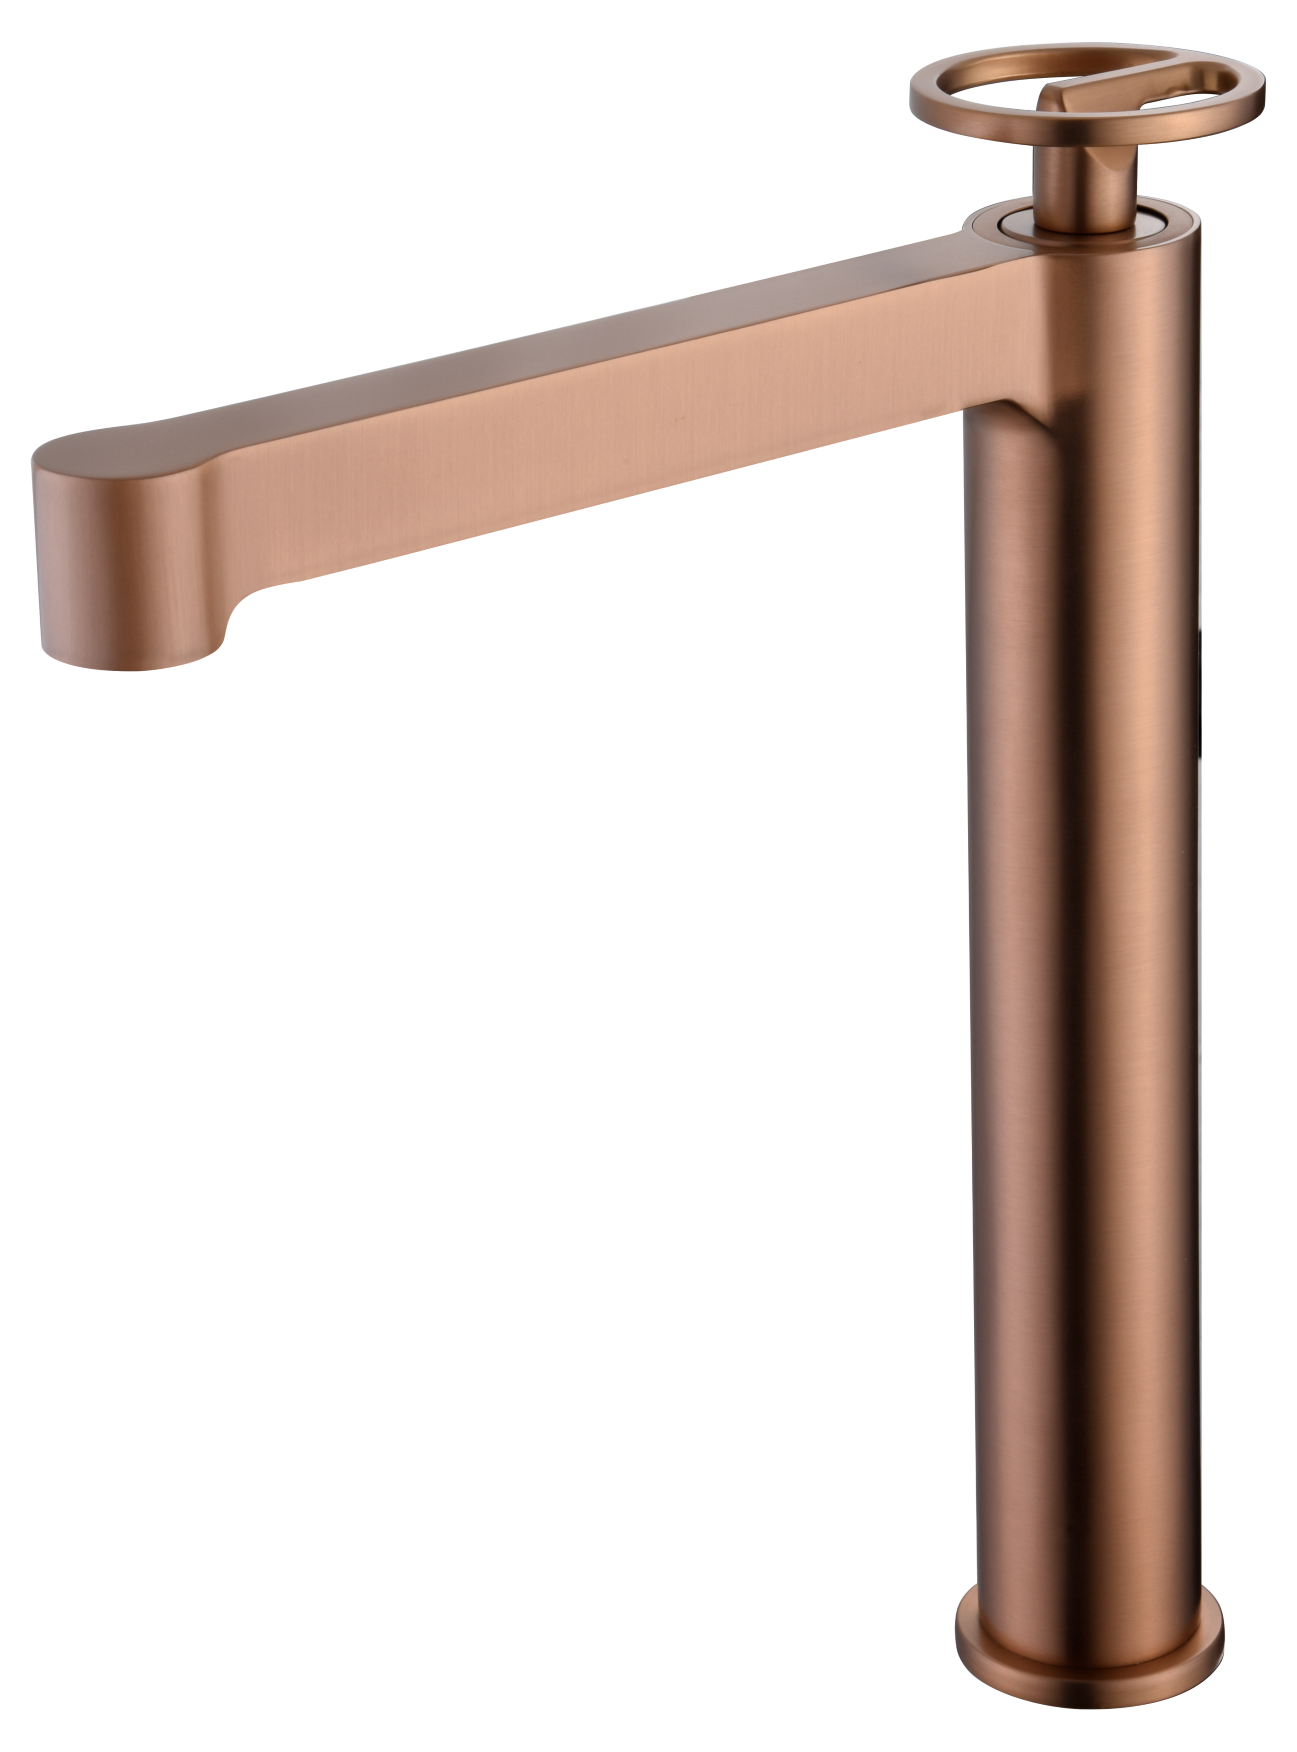 Imex Olimpo brushed rose gold tall basin mixer taps 